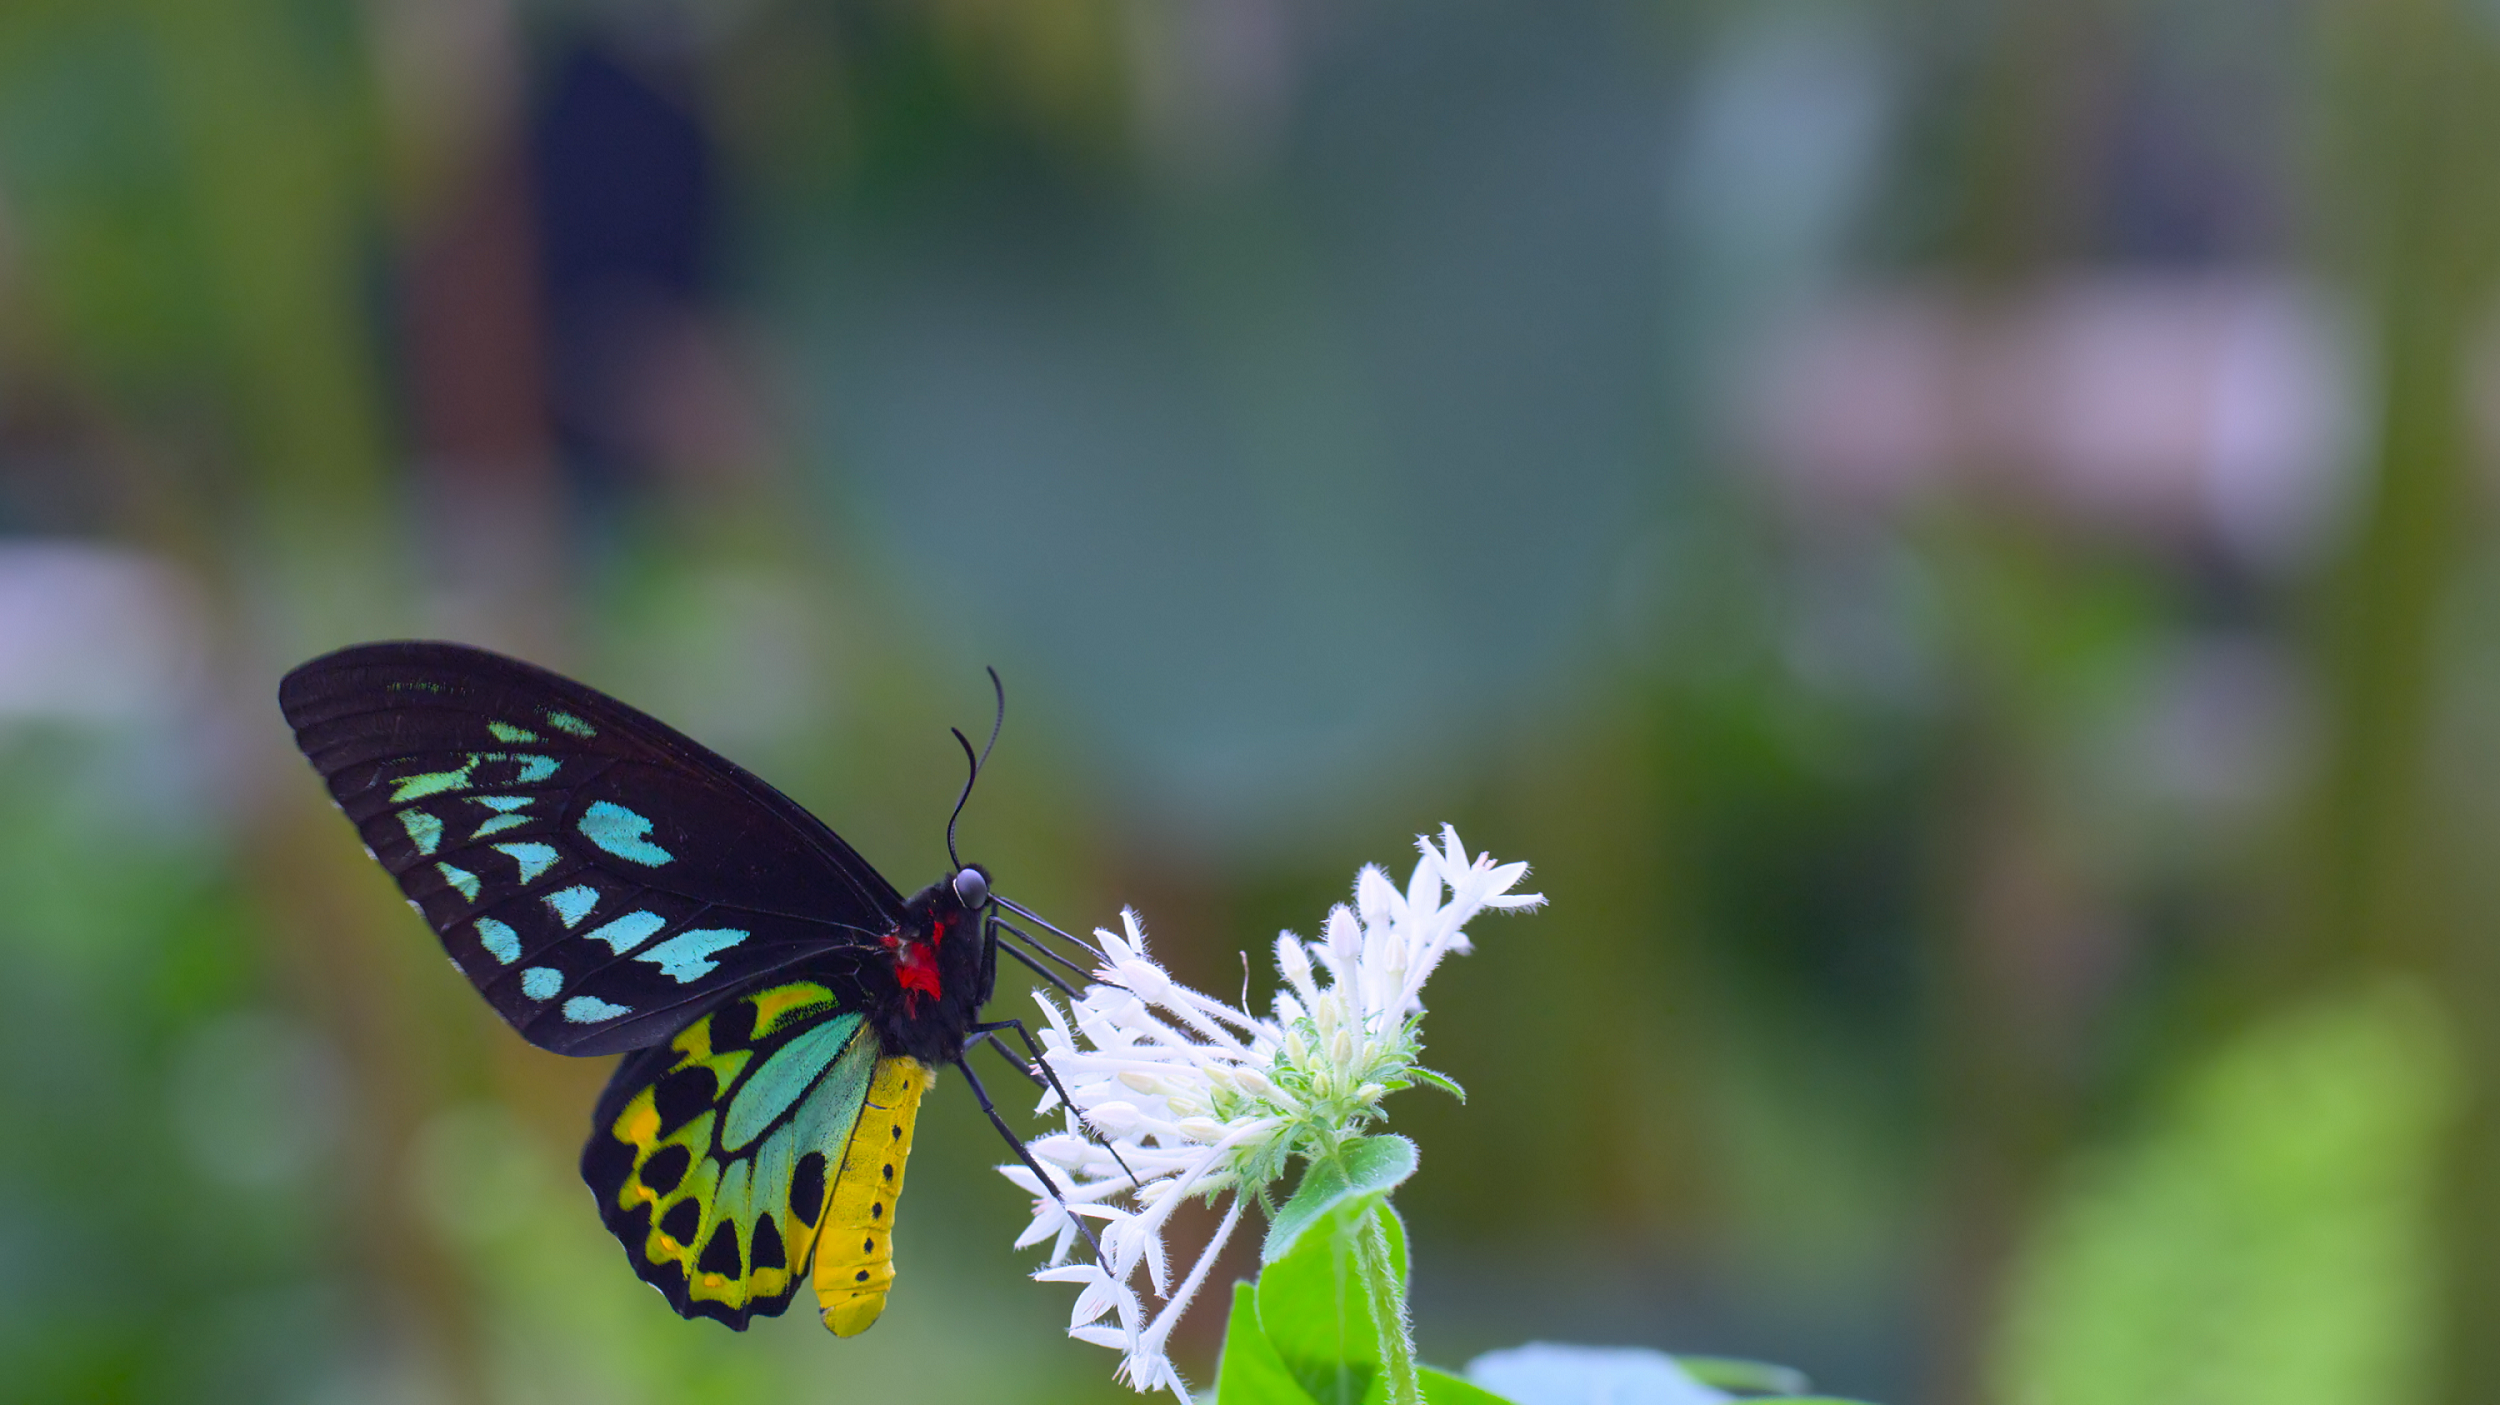 The Hong Kong Space Museum will screen a new dome show, "Animal Kingdom: A Tale of Six Families", at its Space Theatre starting October 1 (Sunday), enabling audiences to explore the habitats of six animal families. Picture shows a butterfly sipping nectar from flowers, while also transferring pollen between them, thus assisting in the reproduction of plants. (Source of photo: DEFINITION FILMS)